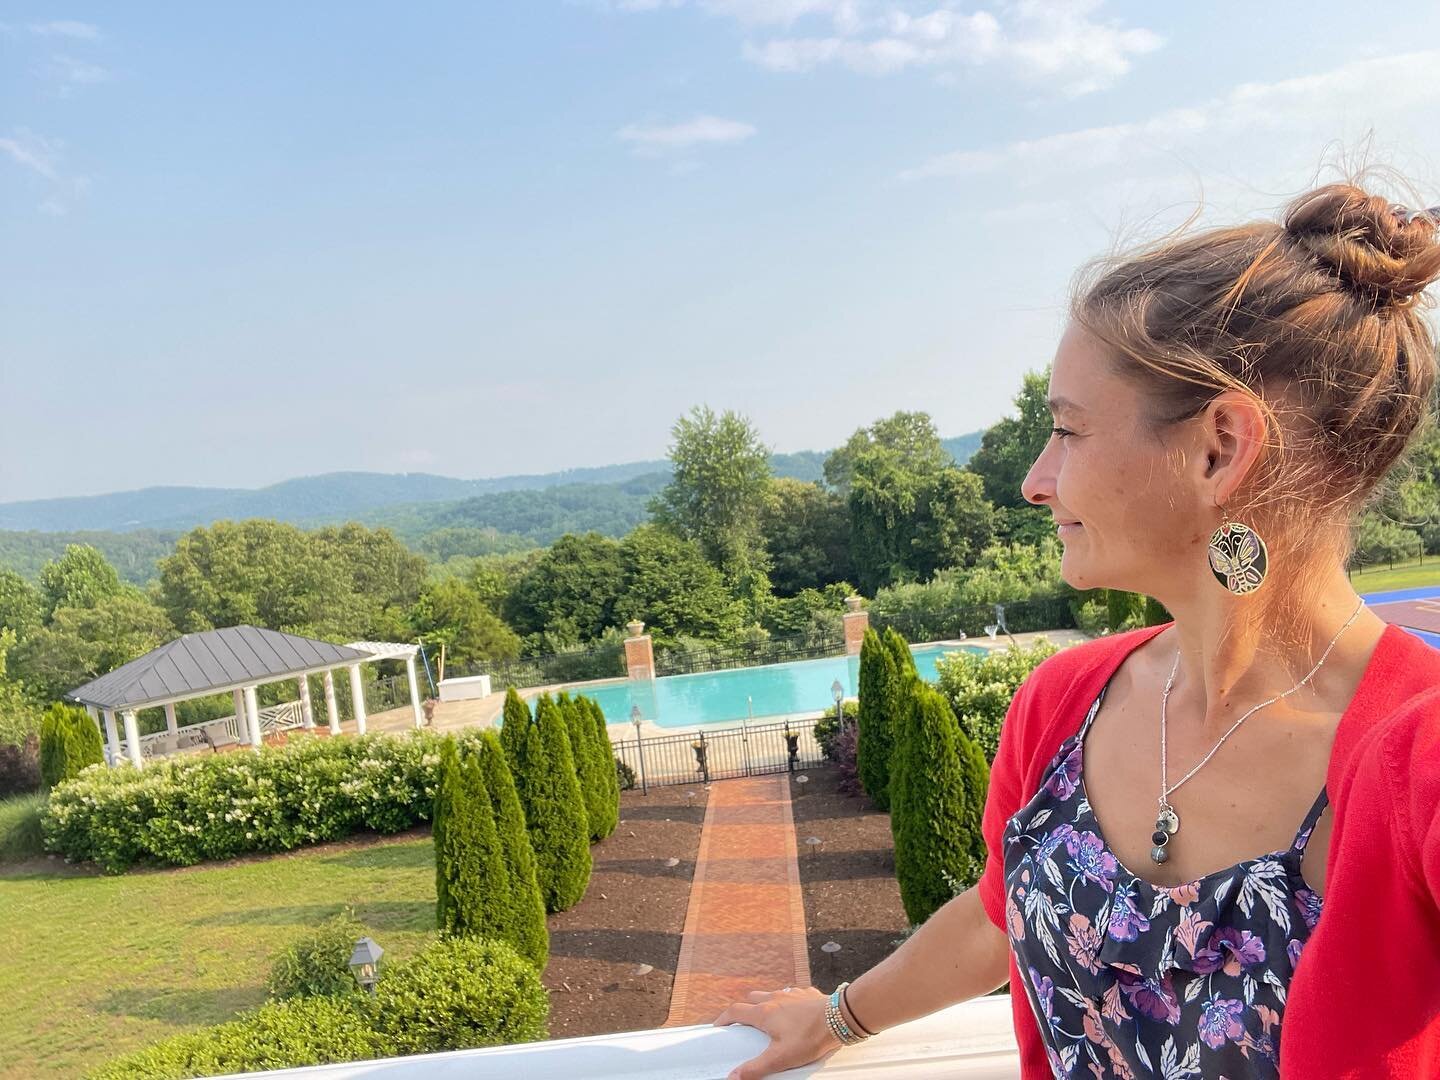 Still, my favorite view in town love showing this home ! 1701 Bentivar Dr
Quintessential Brick Georgian sited on over 88 Acres 
🛏️ 7 Bedrooms 🛀, 9.5 Bathrooms
❤️near the Heart of Charlottesville, in Albemarle County. 
✨NO HOA! 
🔵Upon entry you are